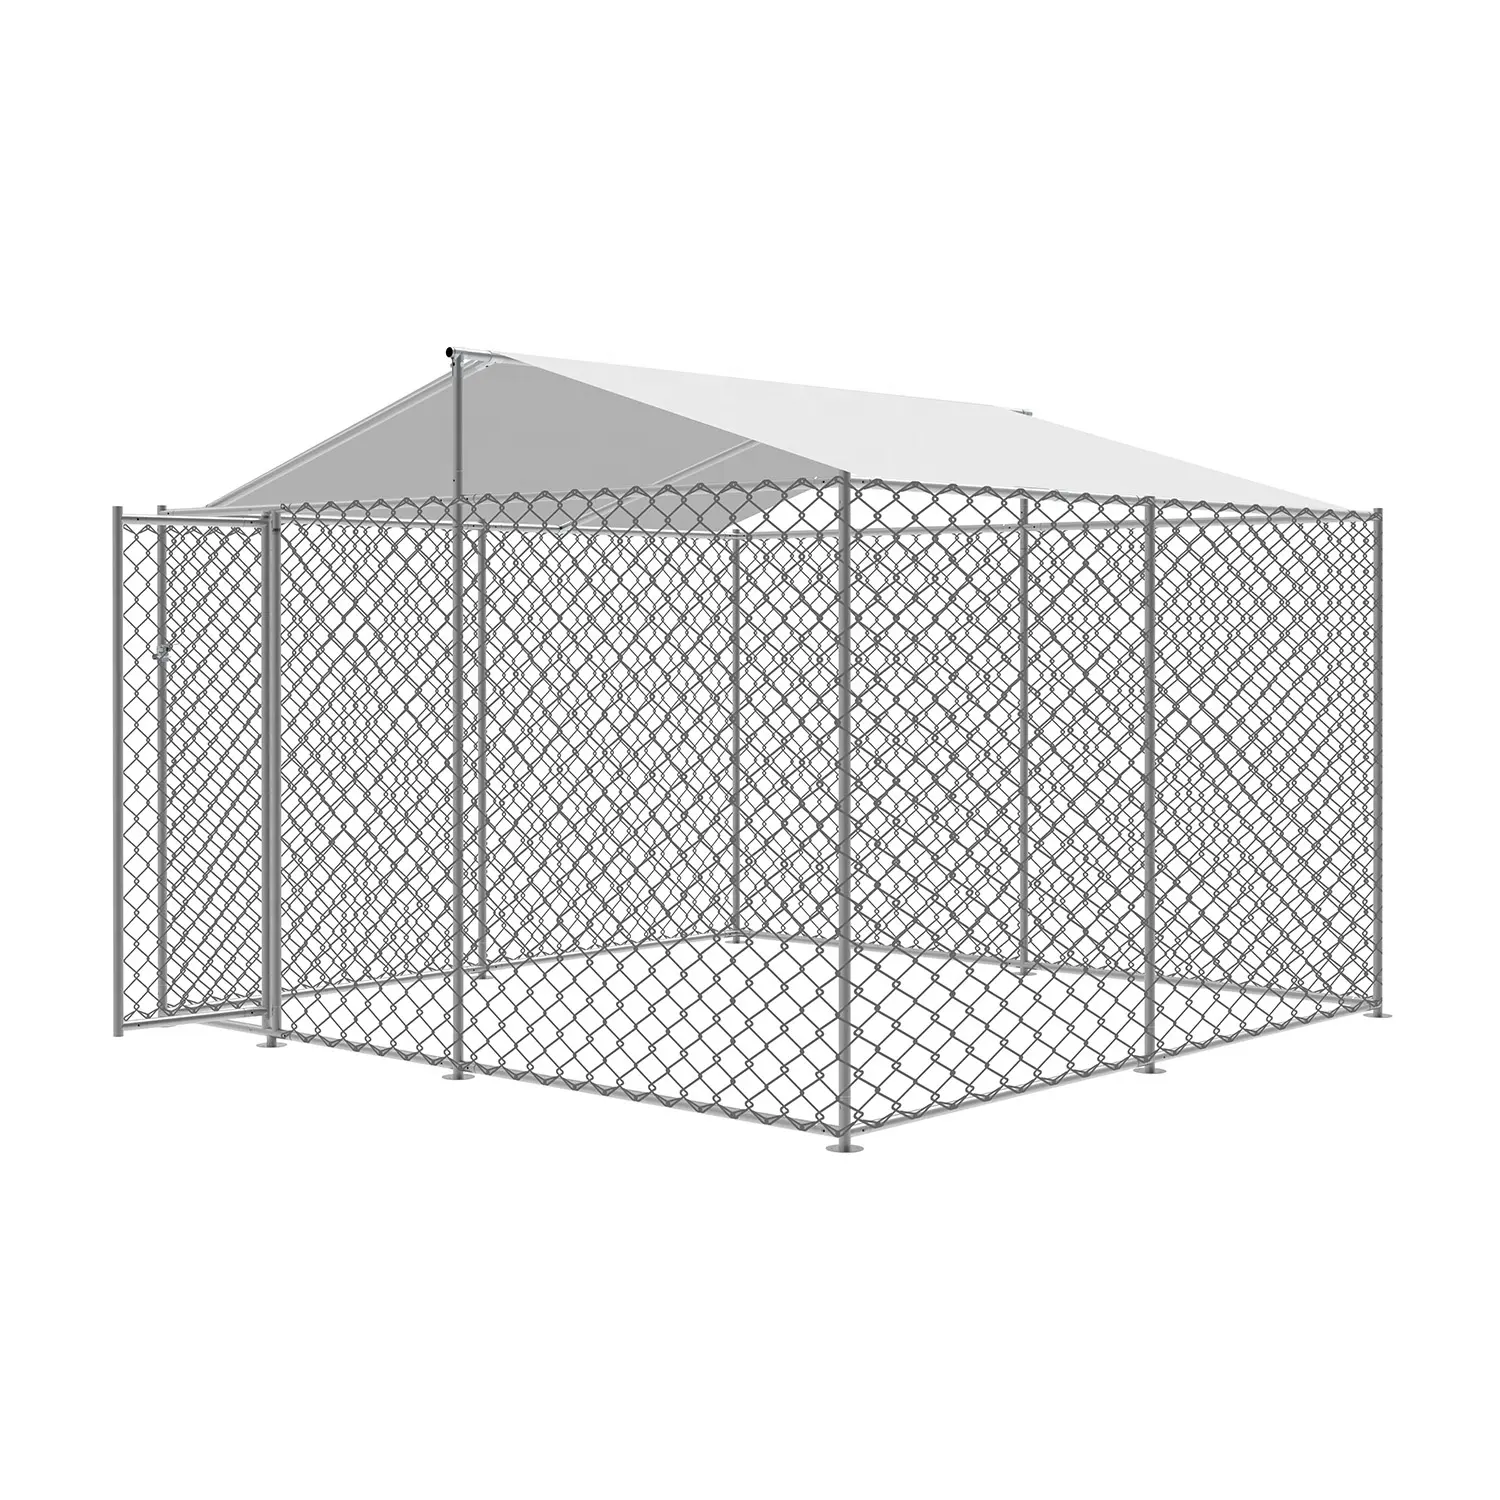 wholesale galvanized large chain link metal dog kennel crate outdoor pet house exercise pen dog run with cover